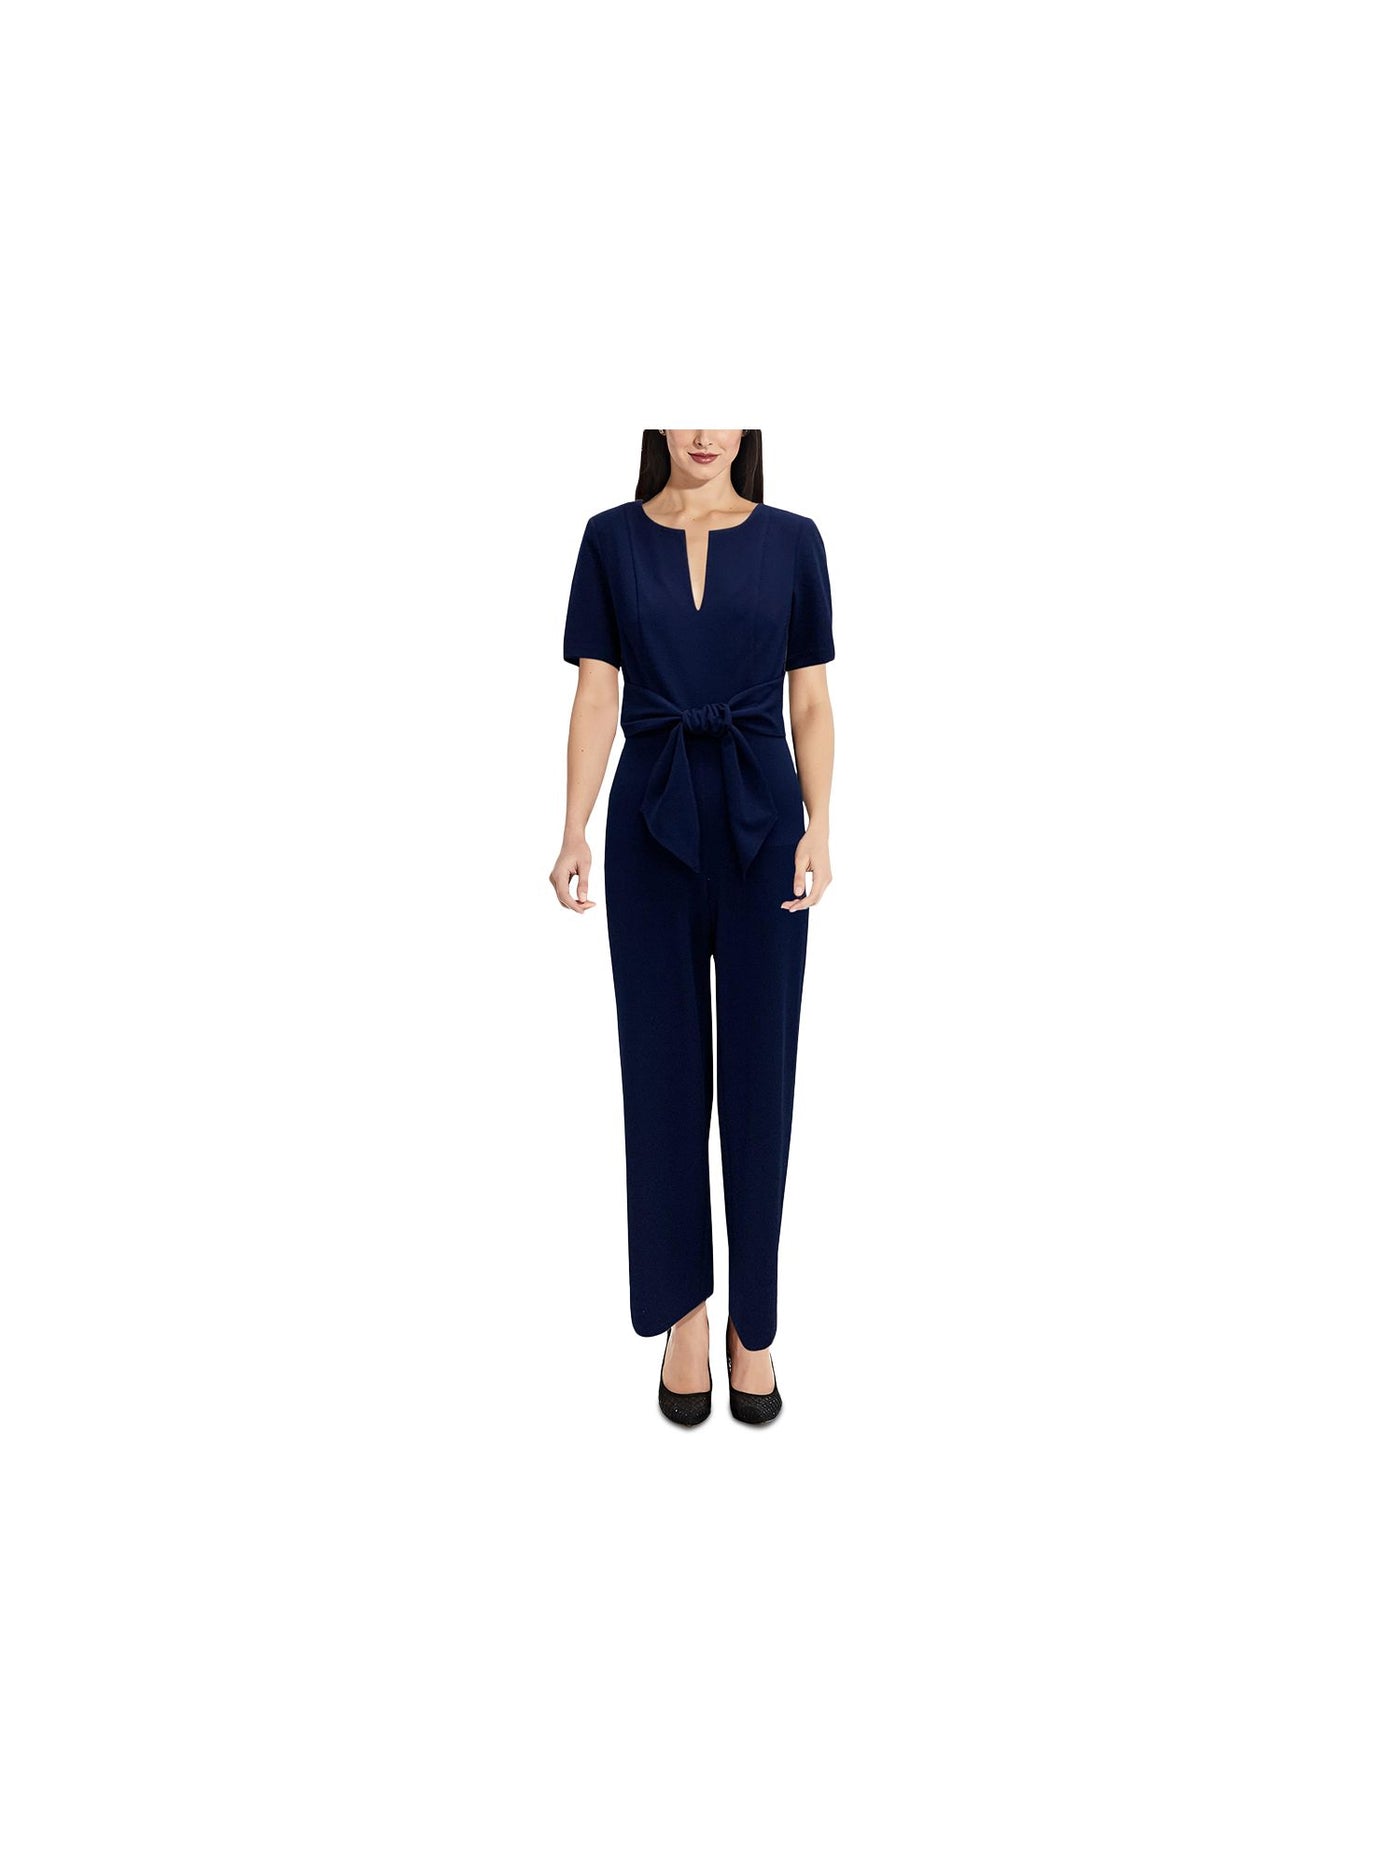 ADRIANNA PAPELL Womens Navy Stretch Zippered Darted Tie Front Short Sleeve Split Wear To Work Jumpsuit 2